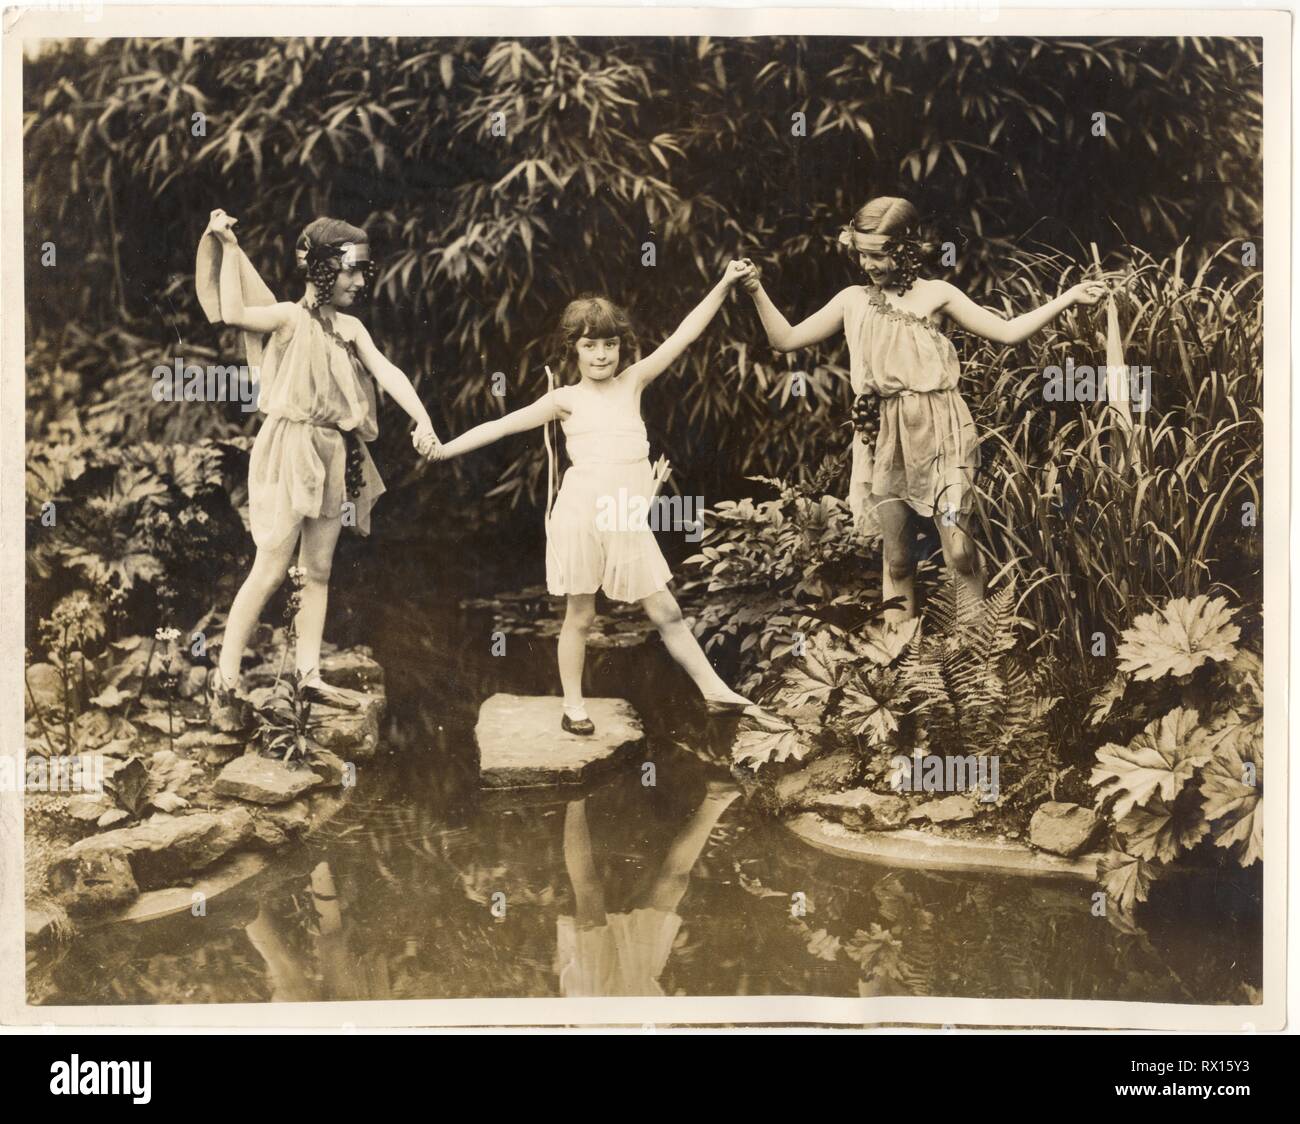 1920's photograph of Lady Acland's daughters, Betty (LH), Molly (RH) & another child, by Billie Bristow, choreography by Dorice Stainer, Leslie Howard's sister, outside in garden, London, U.K. circa 1928 Stock Photo